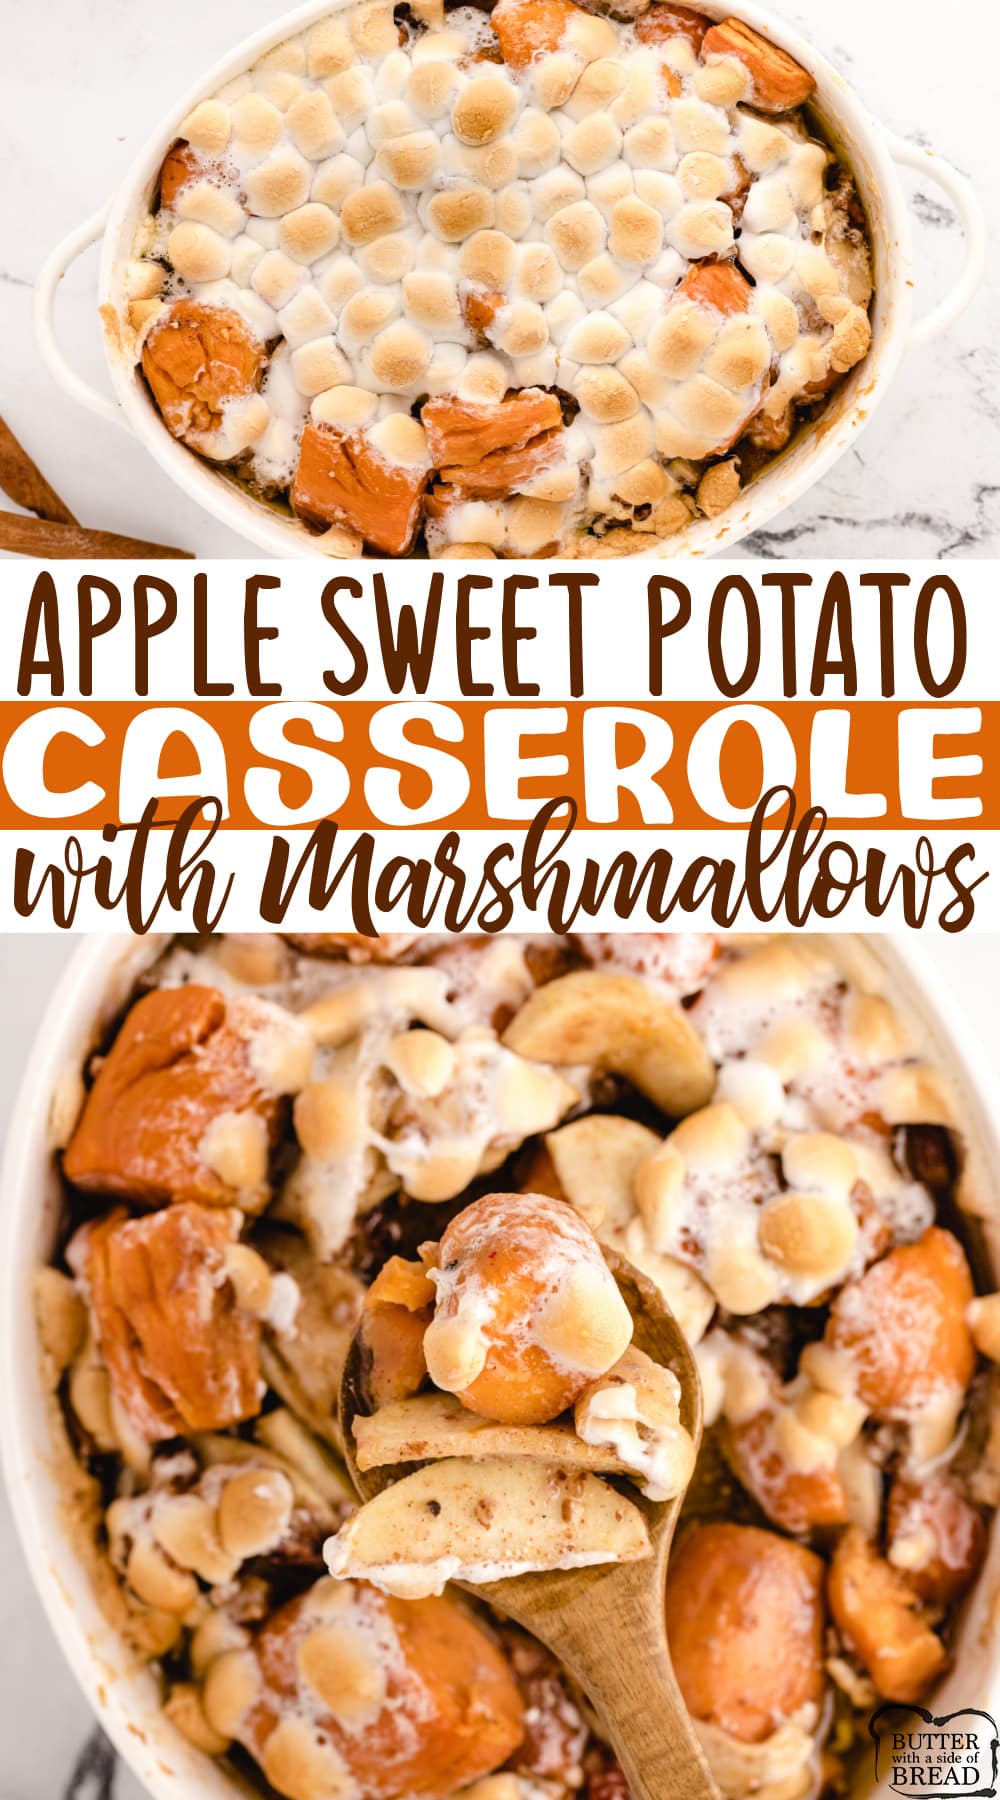 Apple Sweet Potato Casserole with Marshmallows made with sliced apples and canned sweet potatoes along with butter, brown sugar, cinnamon, pecans and marshmallows. Delicious sweet potato recipe that is perfect for Thanksgiving dinner.